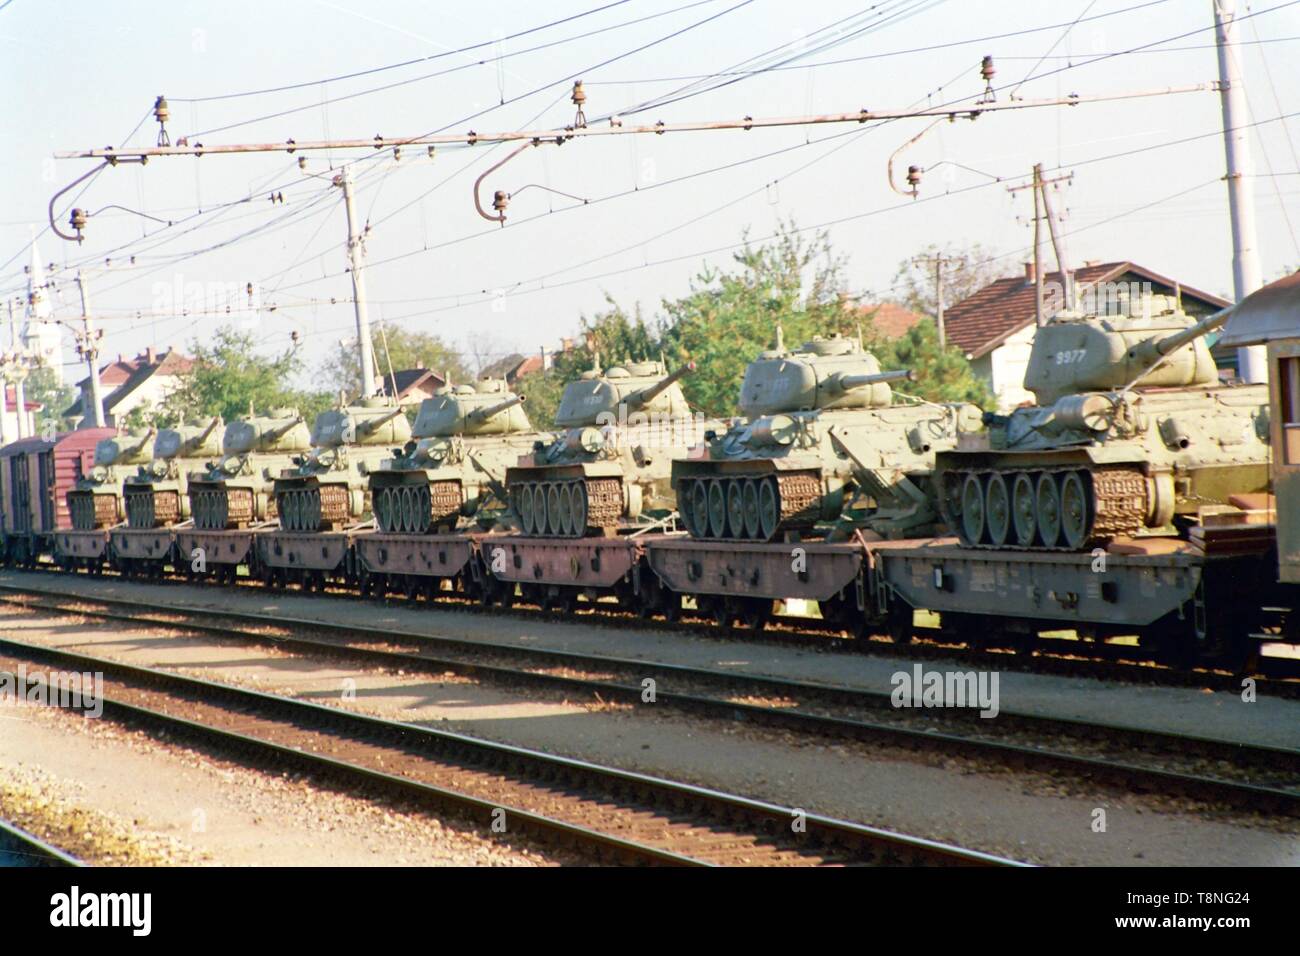 yugoslav-federal-army-tanks-on-a-train-at-dobova-station-on-the-border-between-slovenia-and-croatia-pictured-during-the-break-up-of-yugoslavia-in-1991-picture-by-adam-alexander-T8NG24.jpg